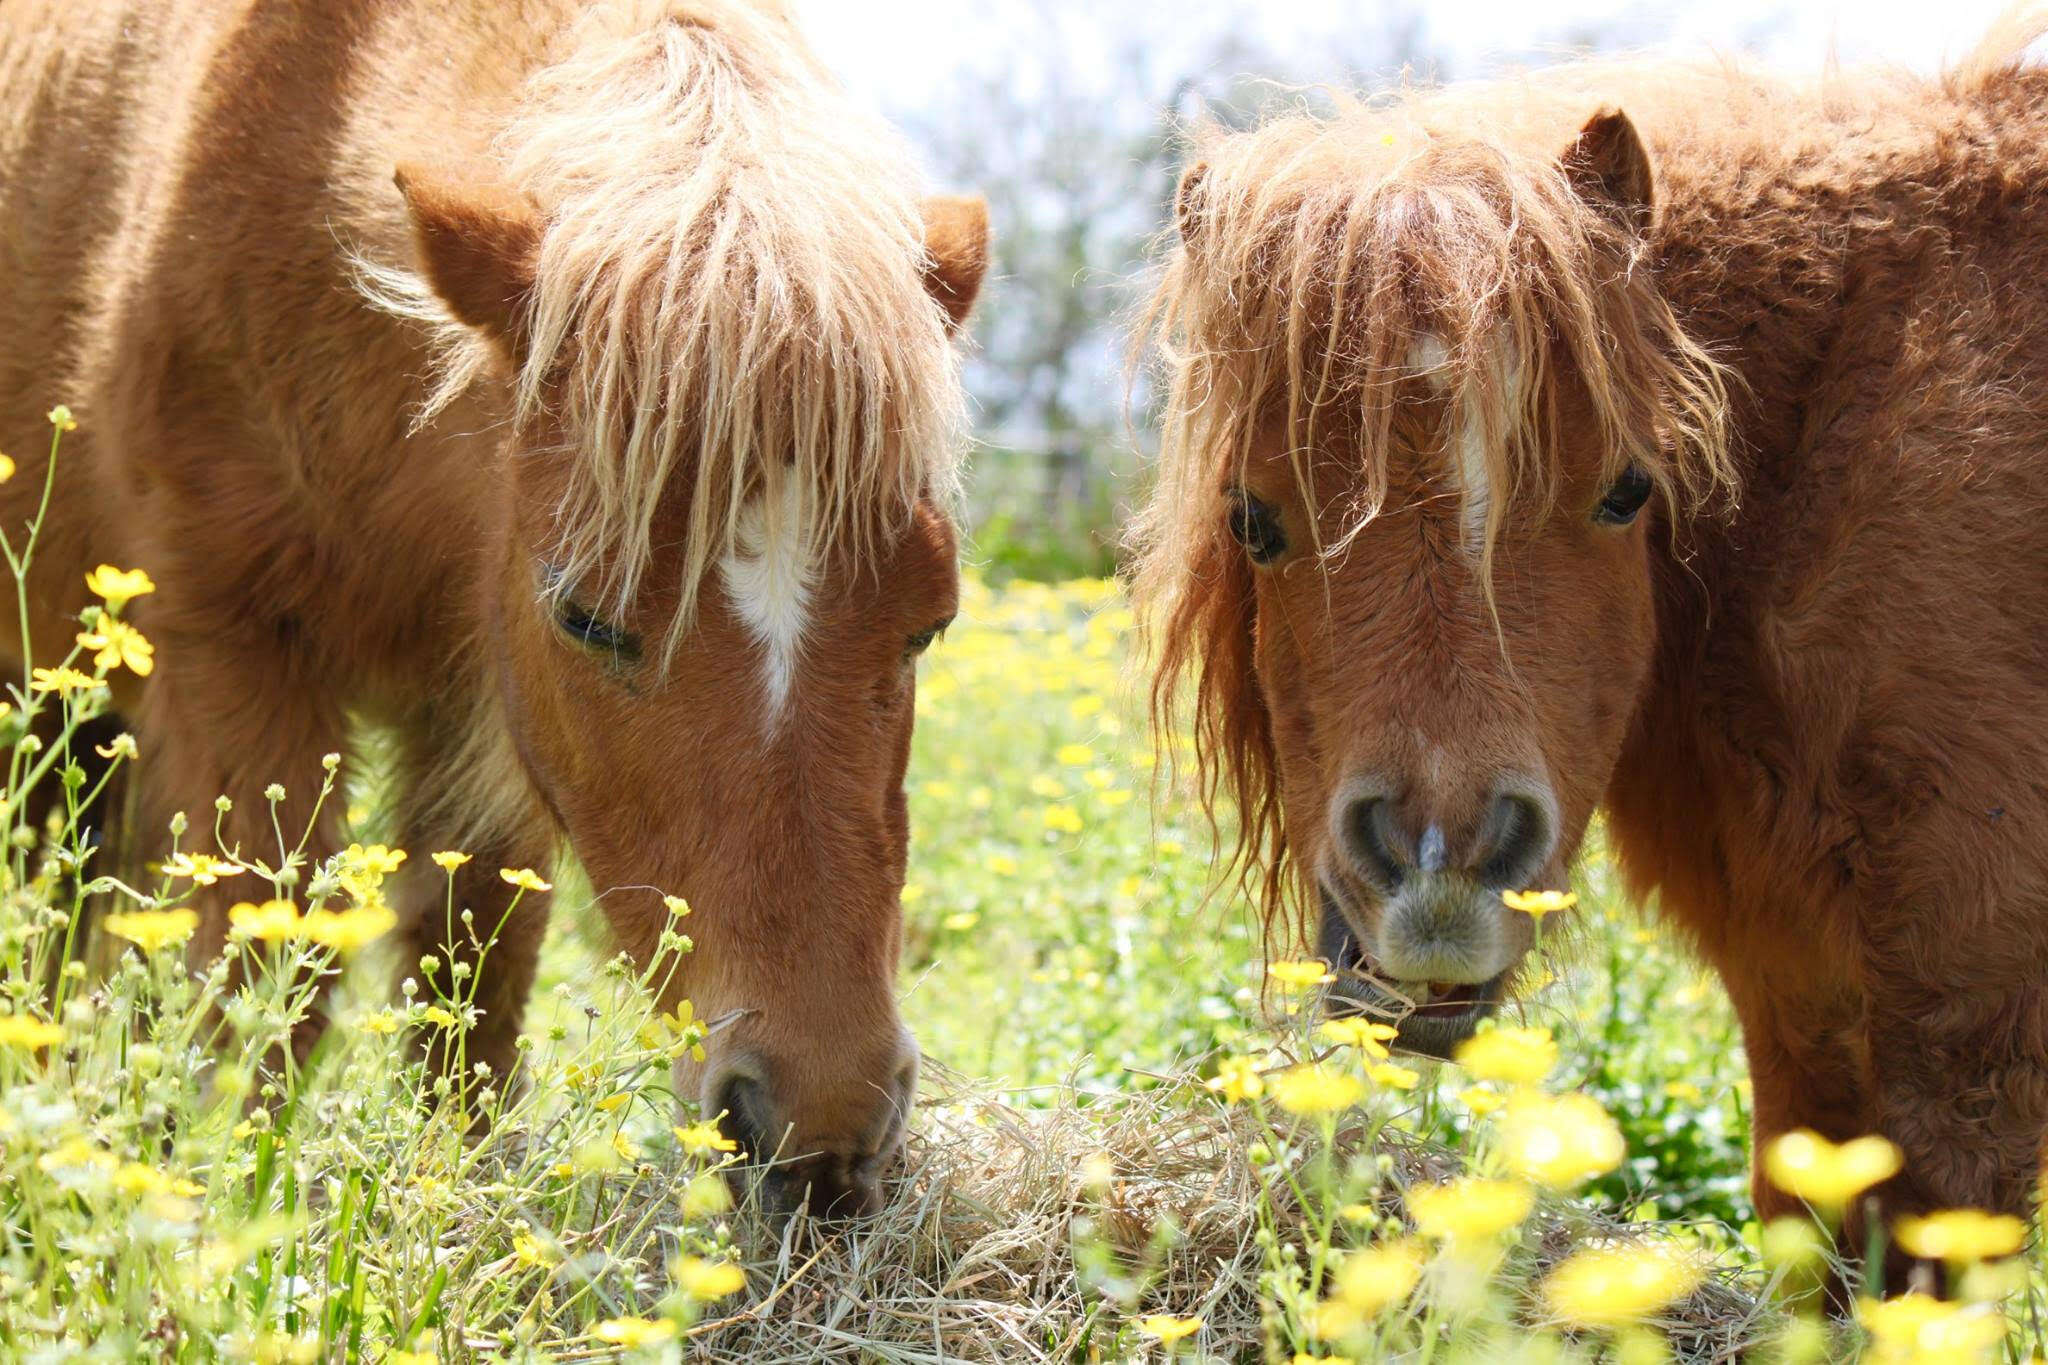 Two miniature horses eating grass and flowers